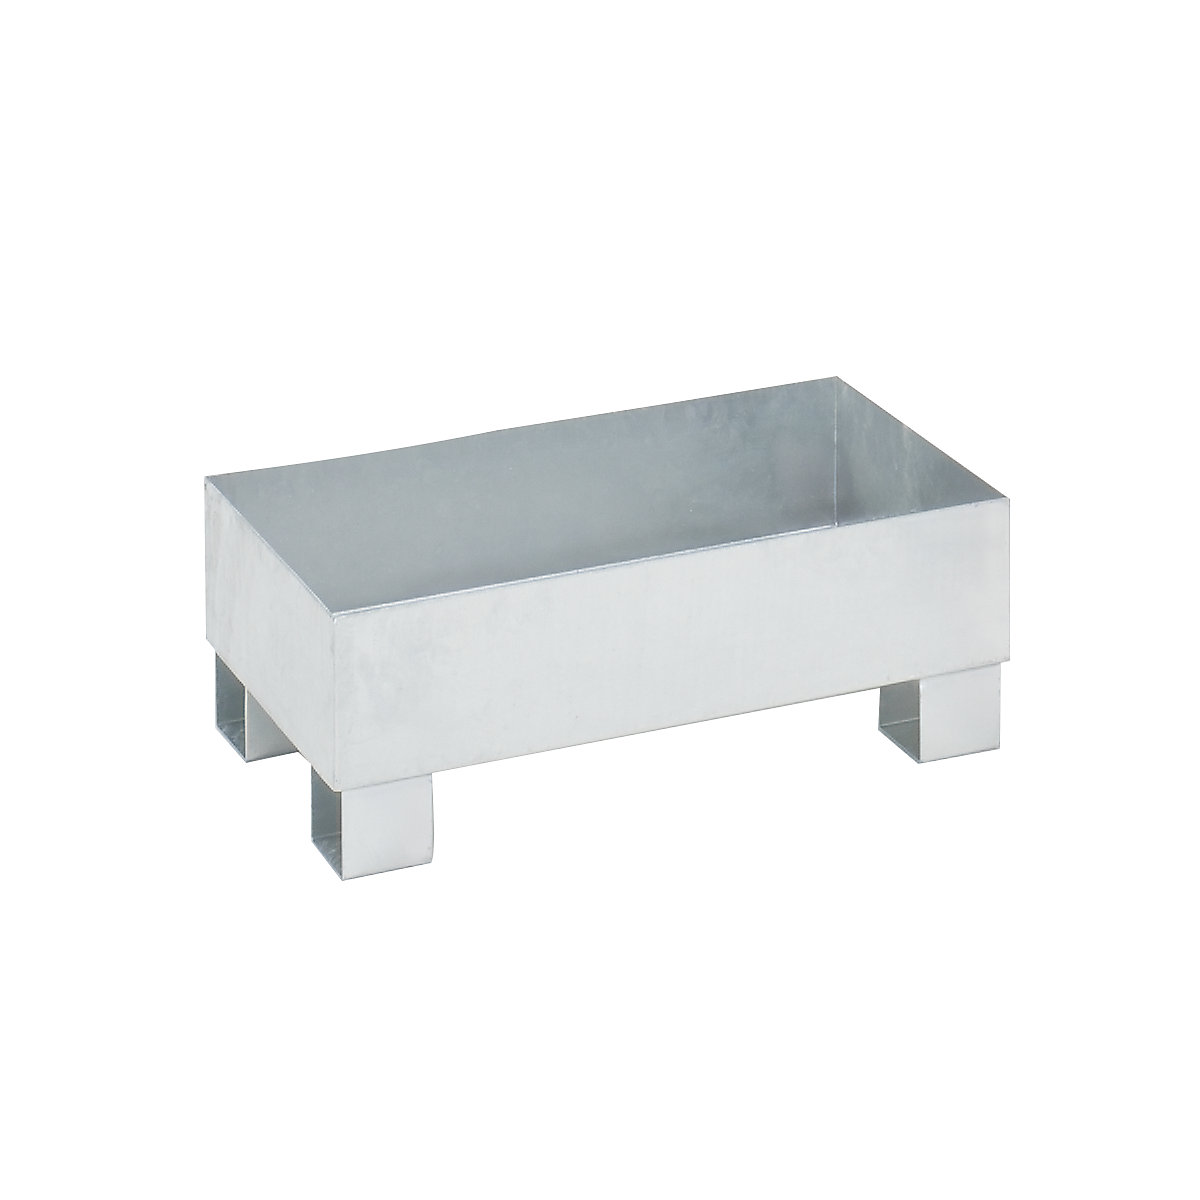 Sump tray for 60 l – eurokraft basic, LxWxH 800 x 500 x 290 mm, with certification, hot dip galvanised, without grate-3